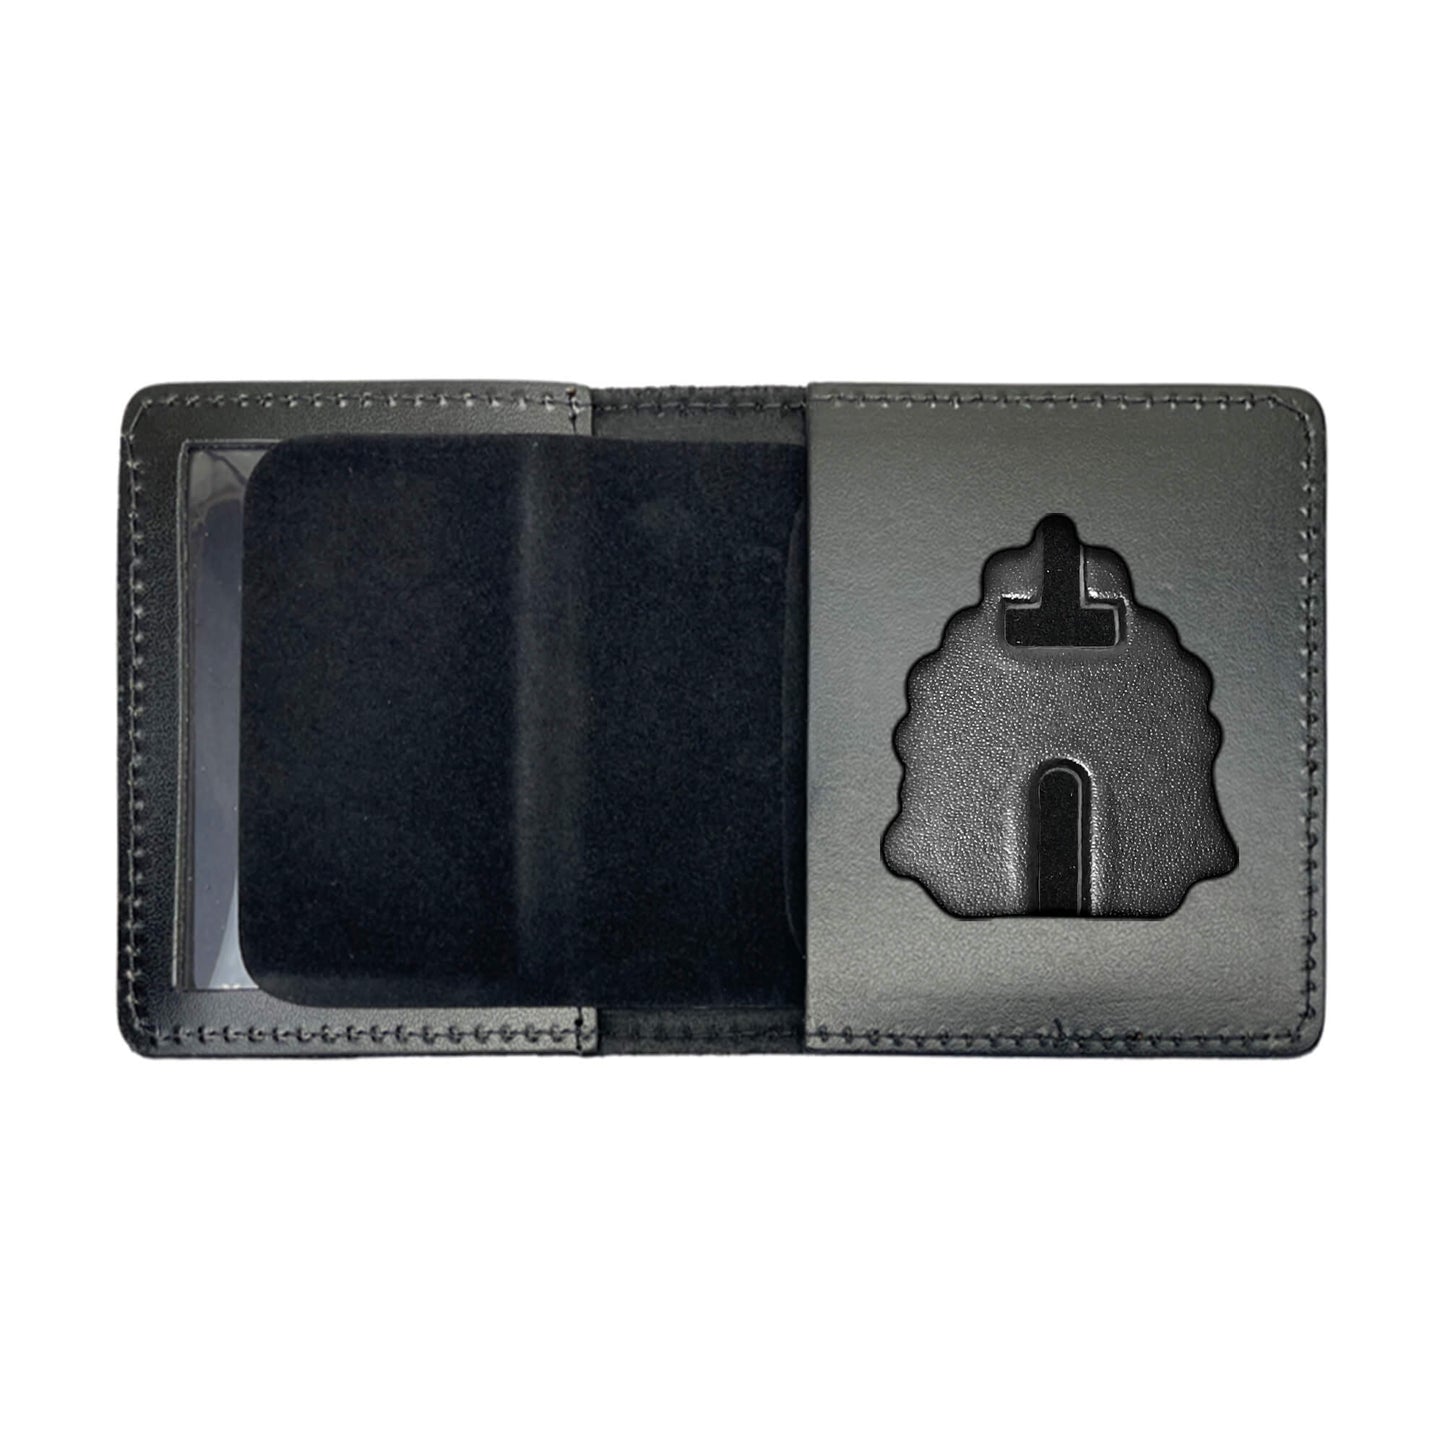 AACPO Peace Officer Badge/ ID Case with Credit Card Slots-911 Duty Gear Canada-911 Duty Gear Canada